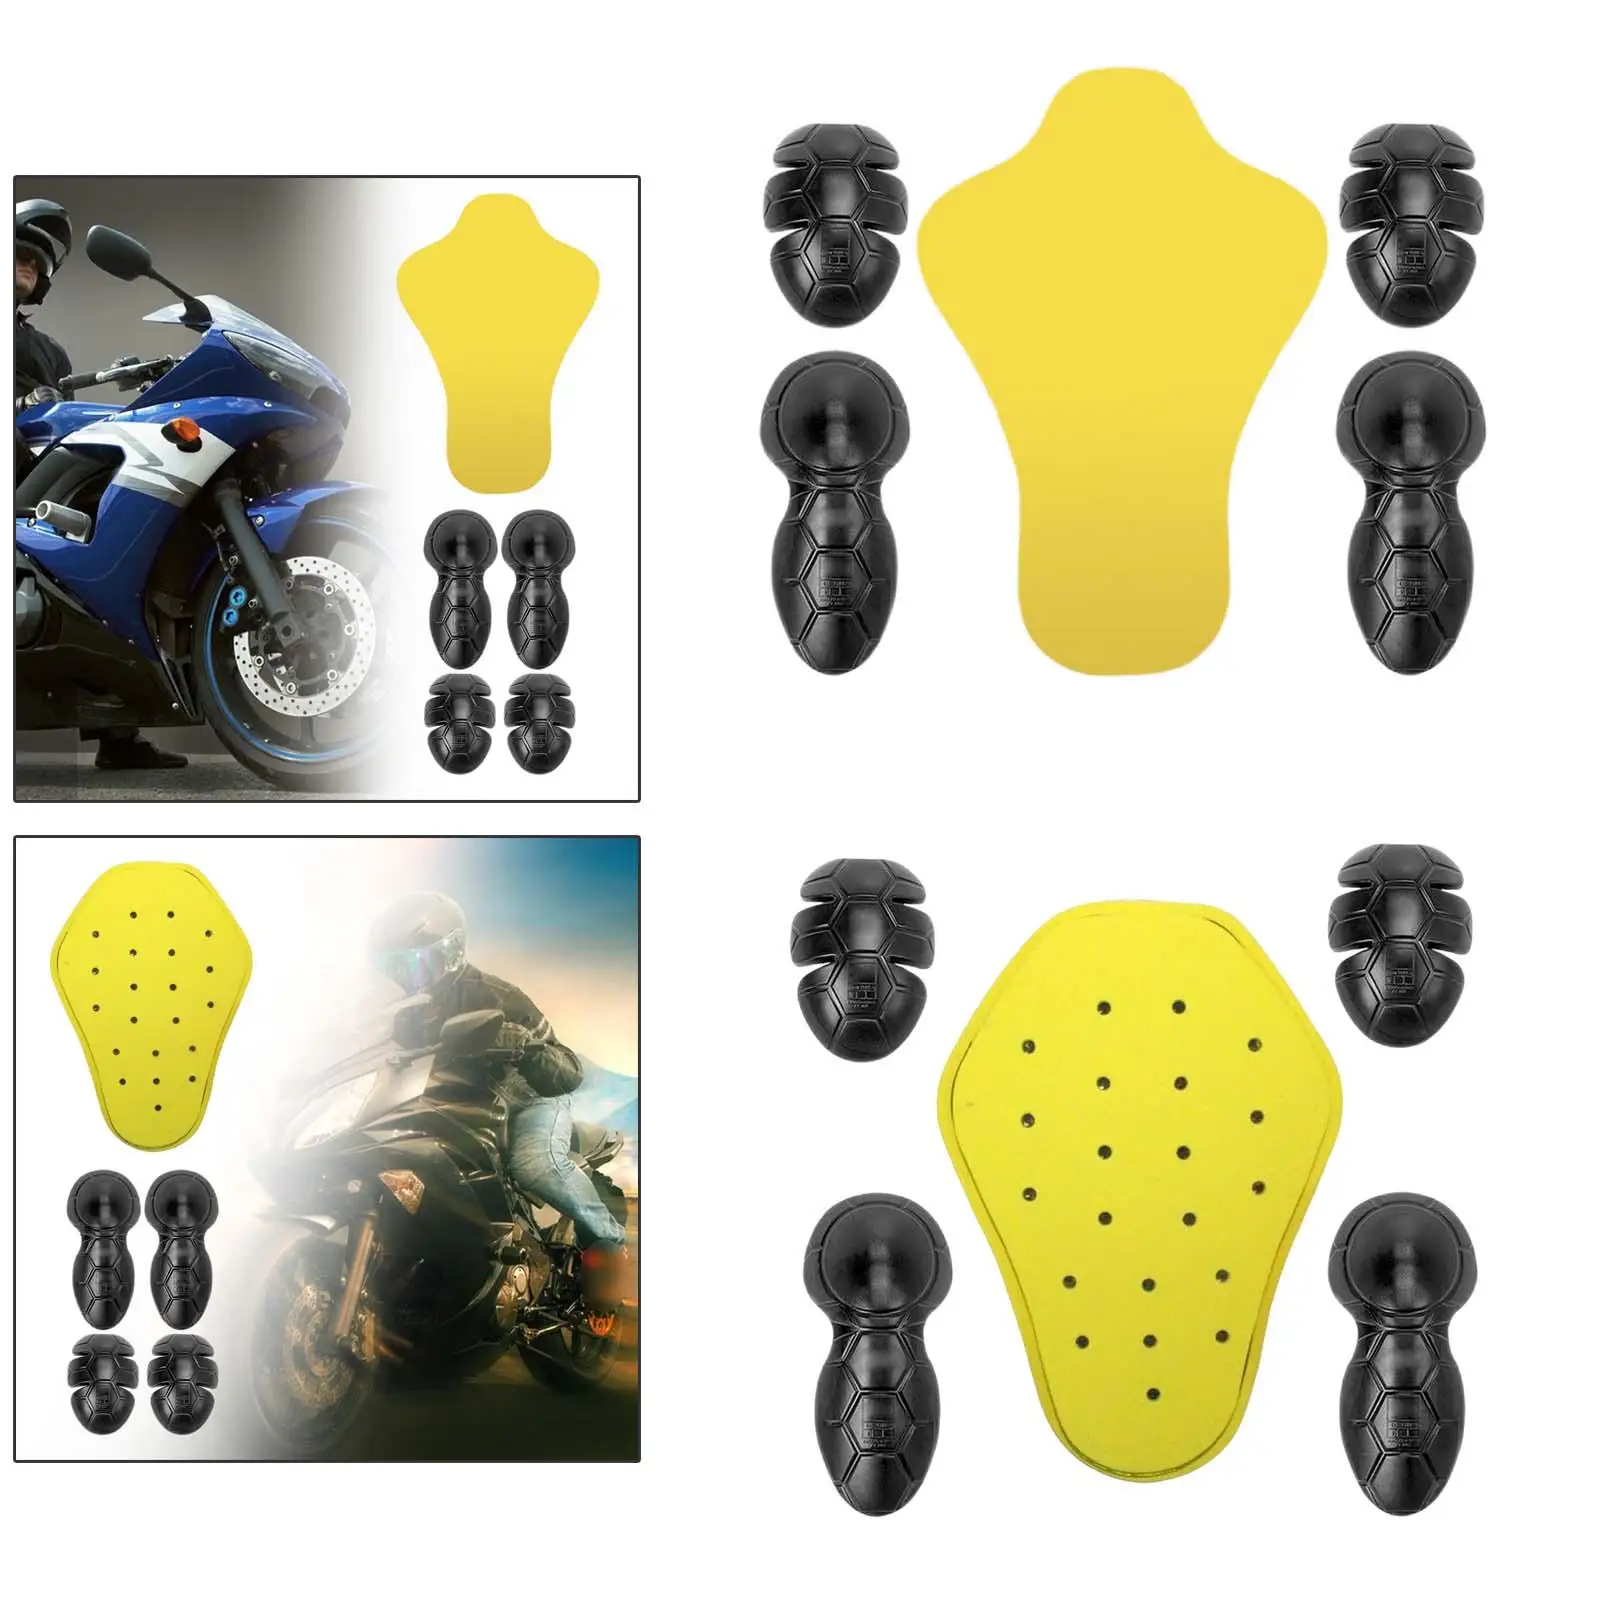 5 Pieces EVA Motorcycle Armour Set Elbow Knee Back Pad Flexible Breathing Racing Suit Protectors for Riding Motorbike Gear